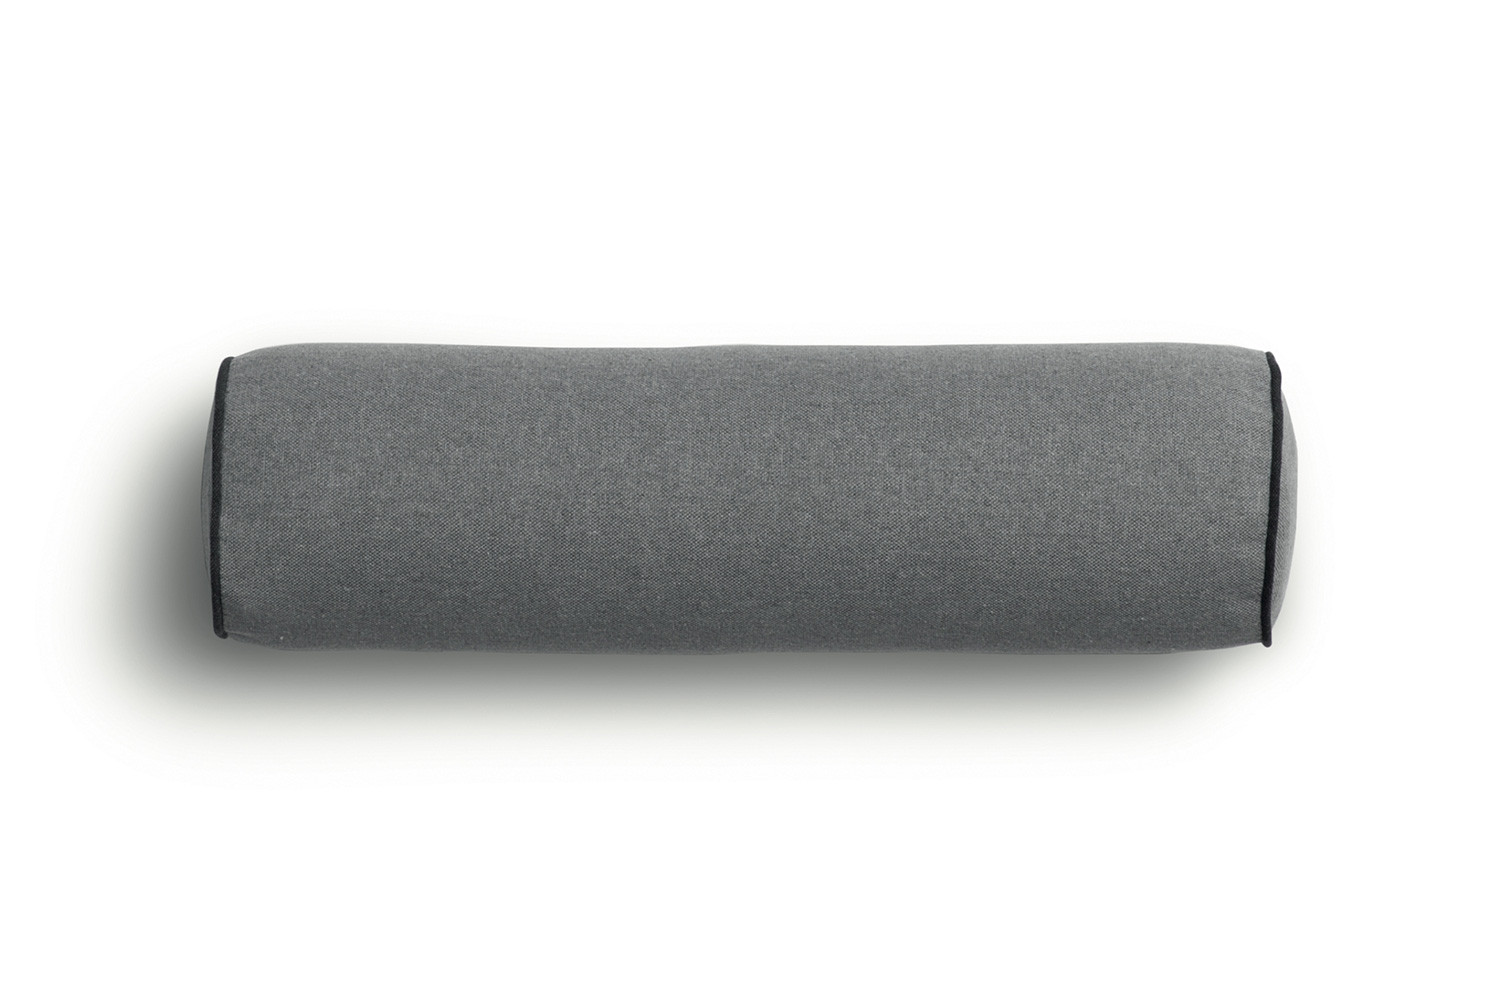 Cylindrical bolster cushion in fabric, velvet or leather, with contrast piping